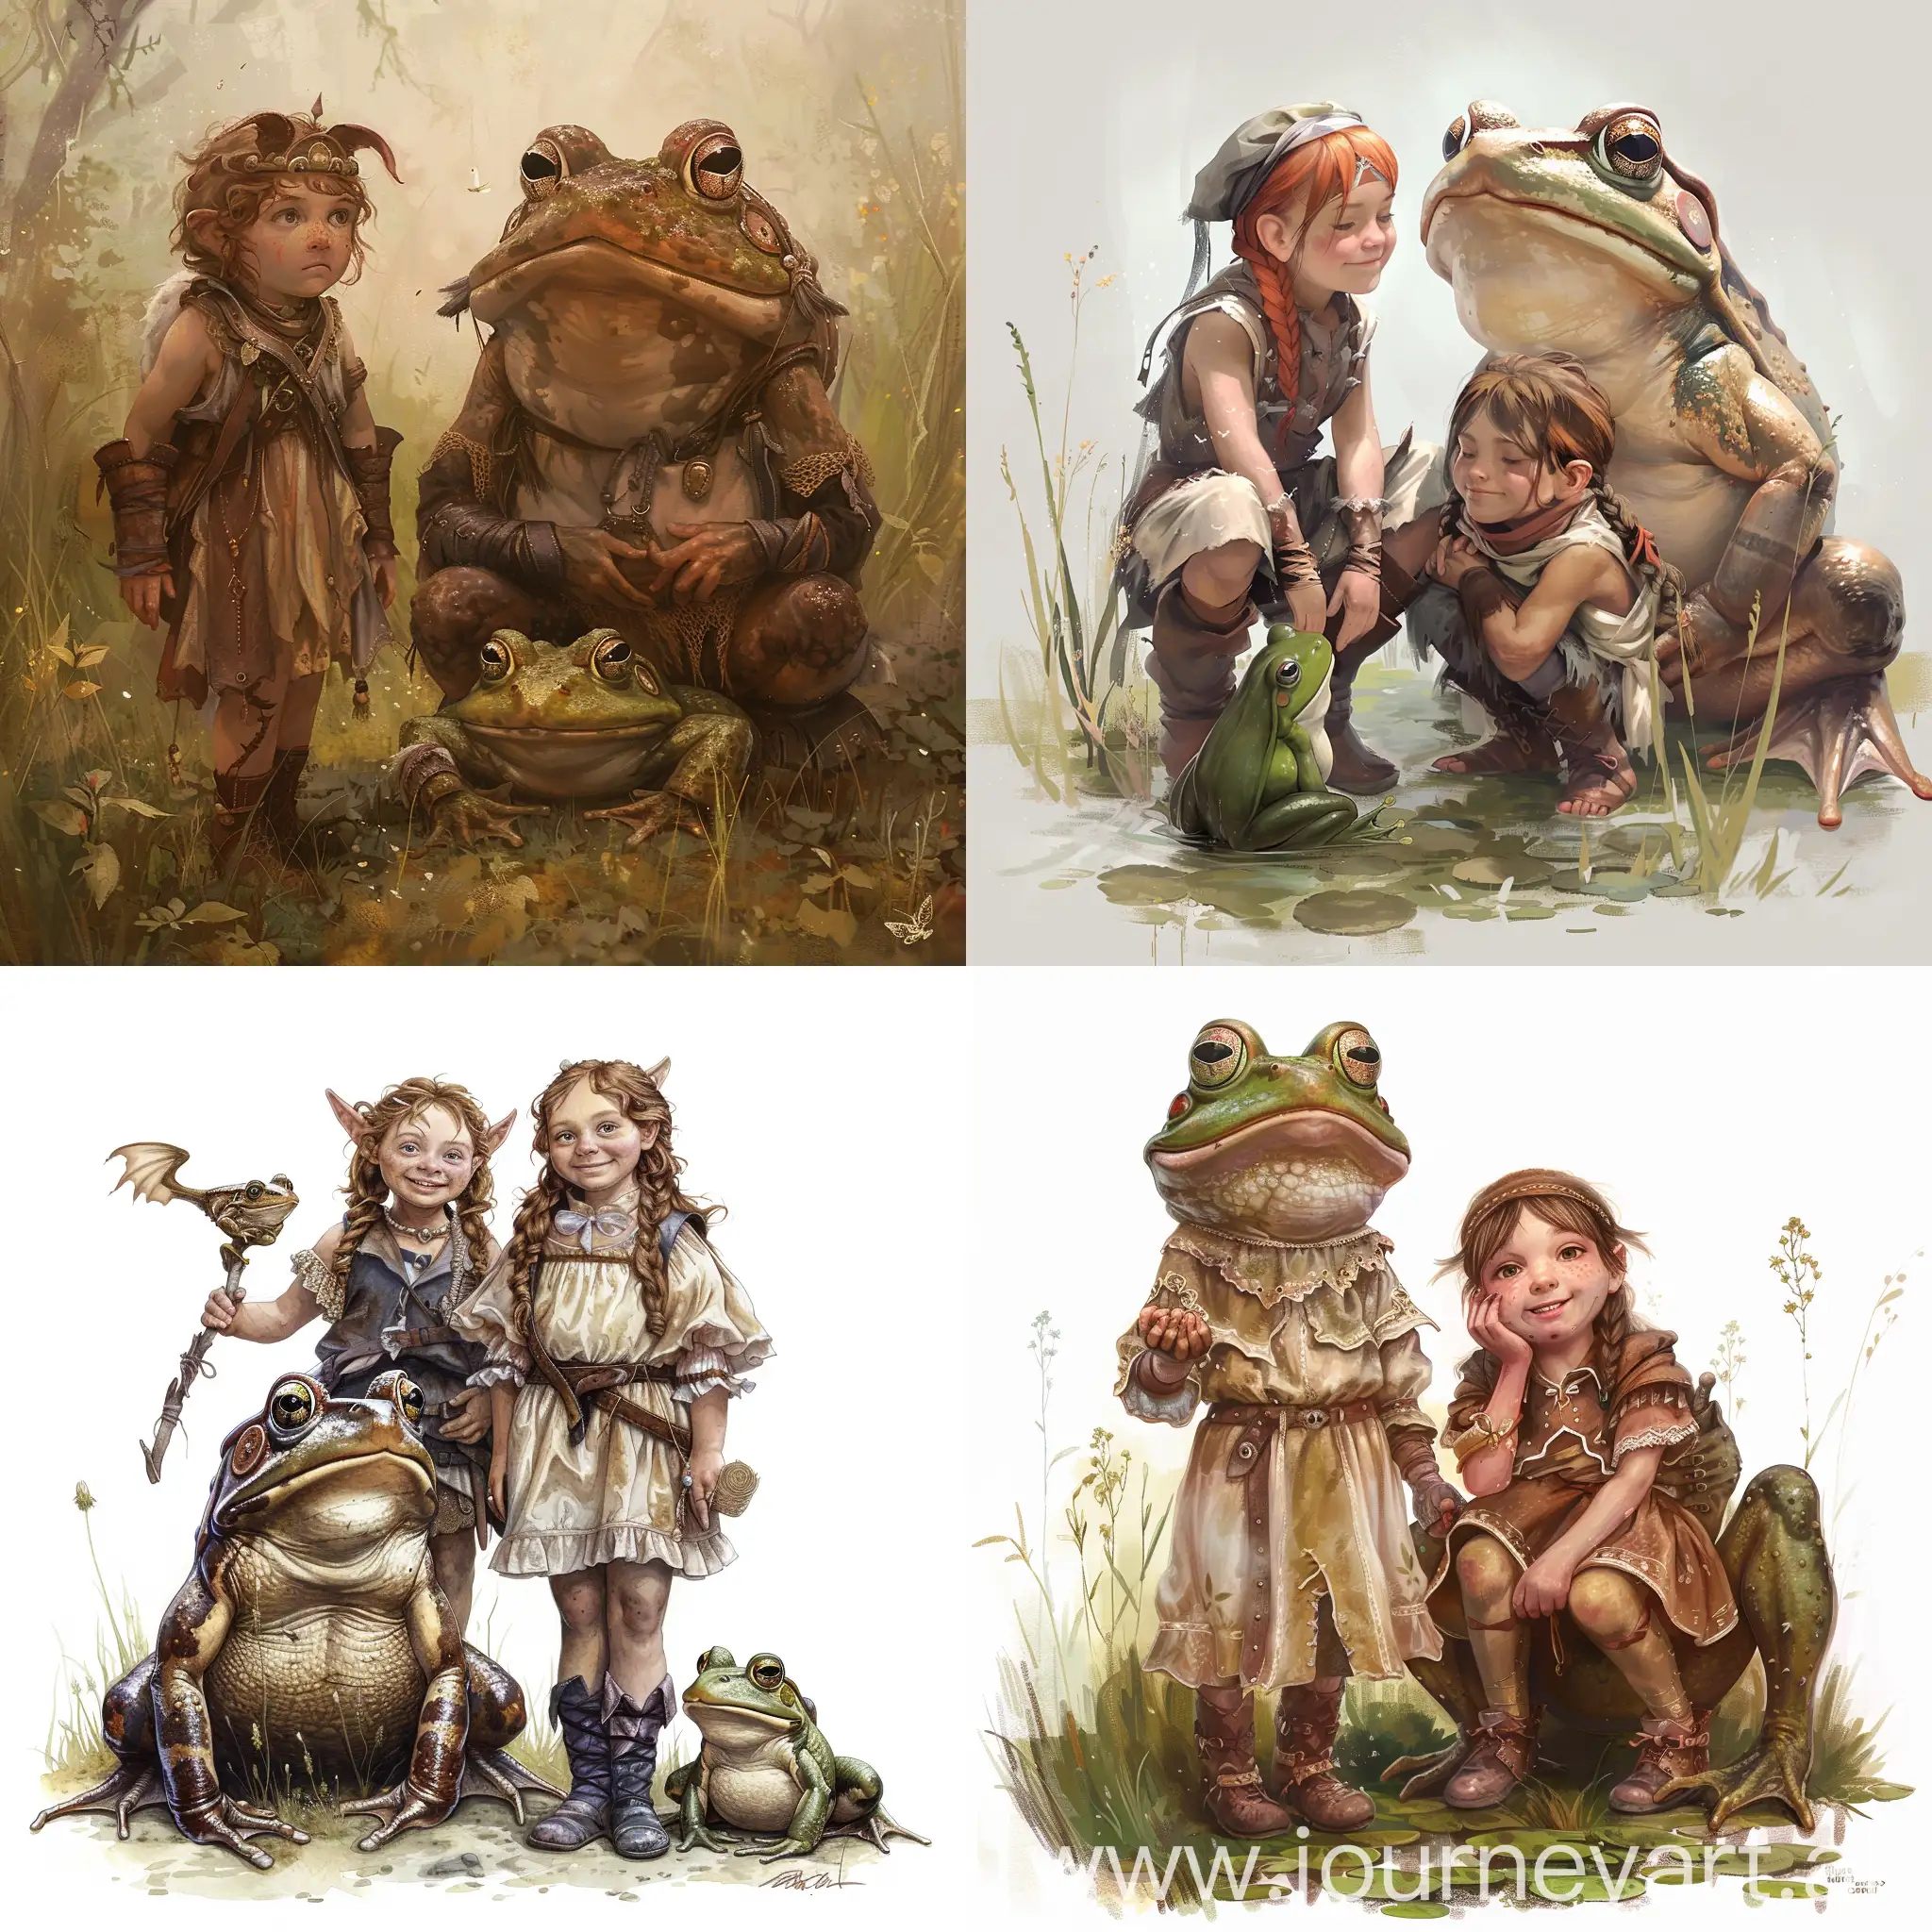 Two-Kid-Fairies-with-Large-Frog-Companion-in-Cute-Fantasy-Style